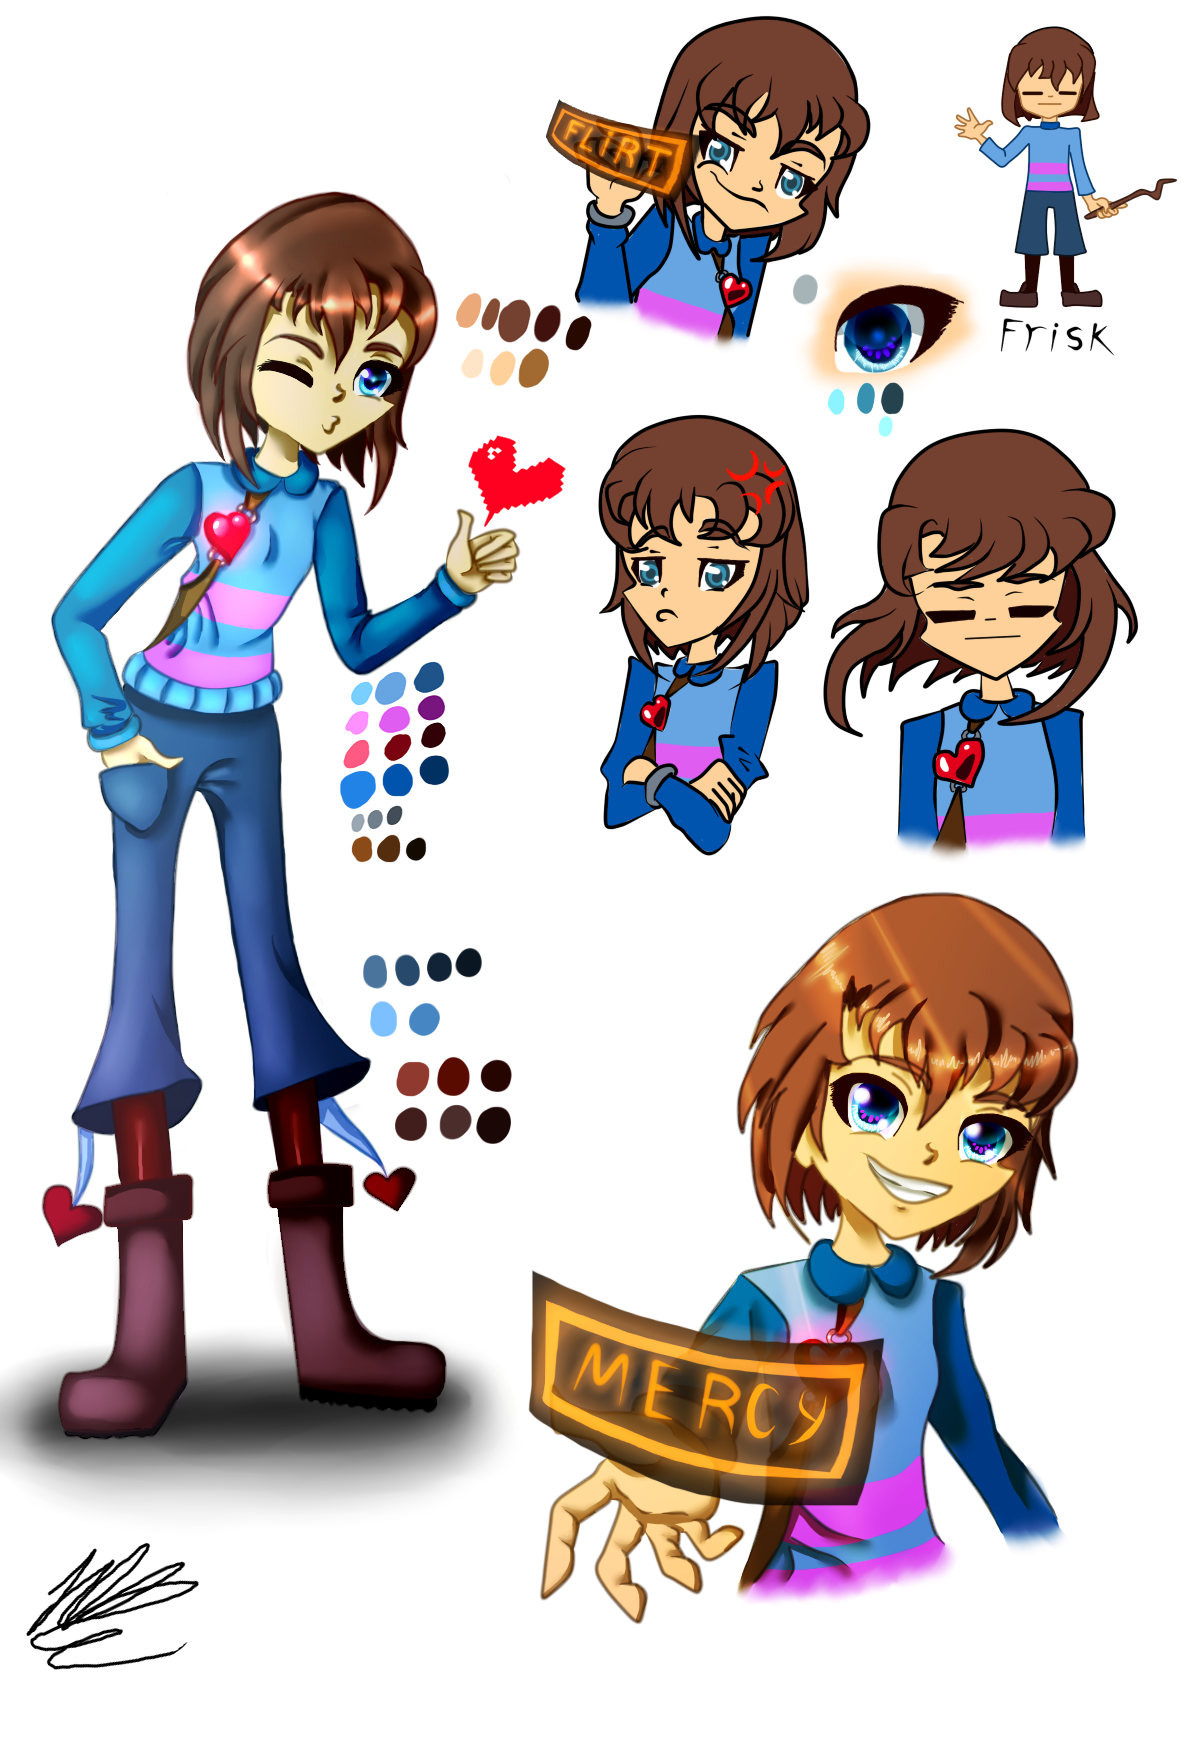 Frisk The Human By Nicuiolo On Deviantart